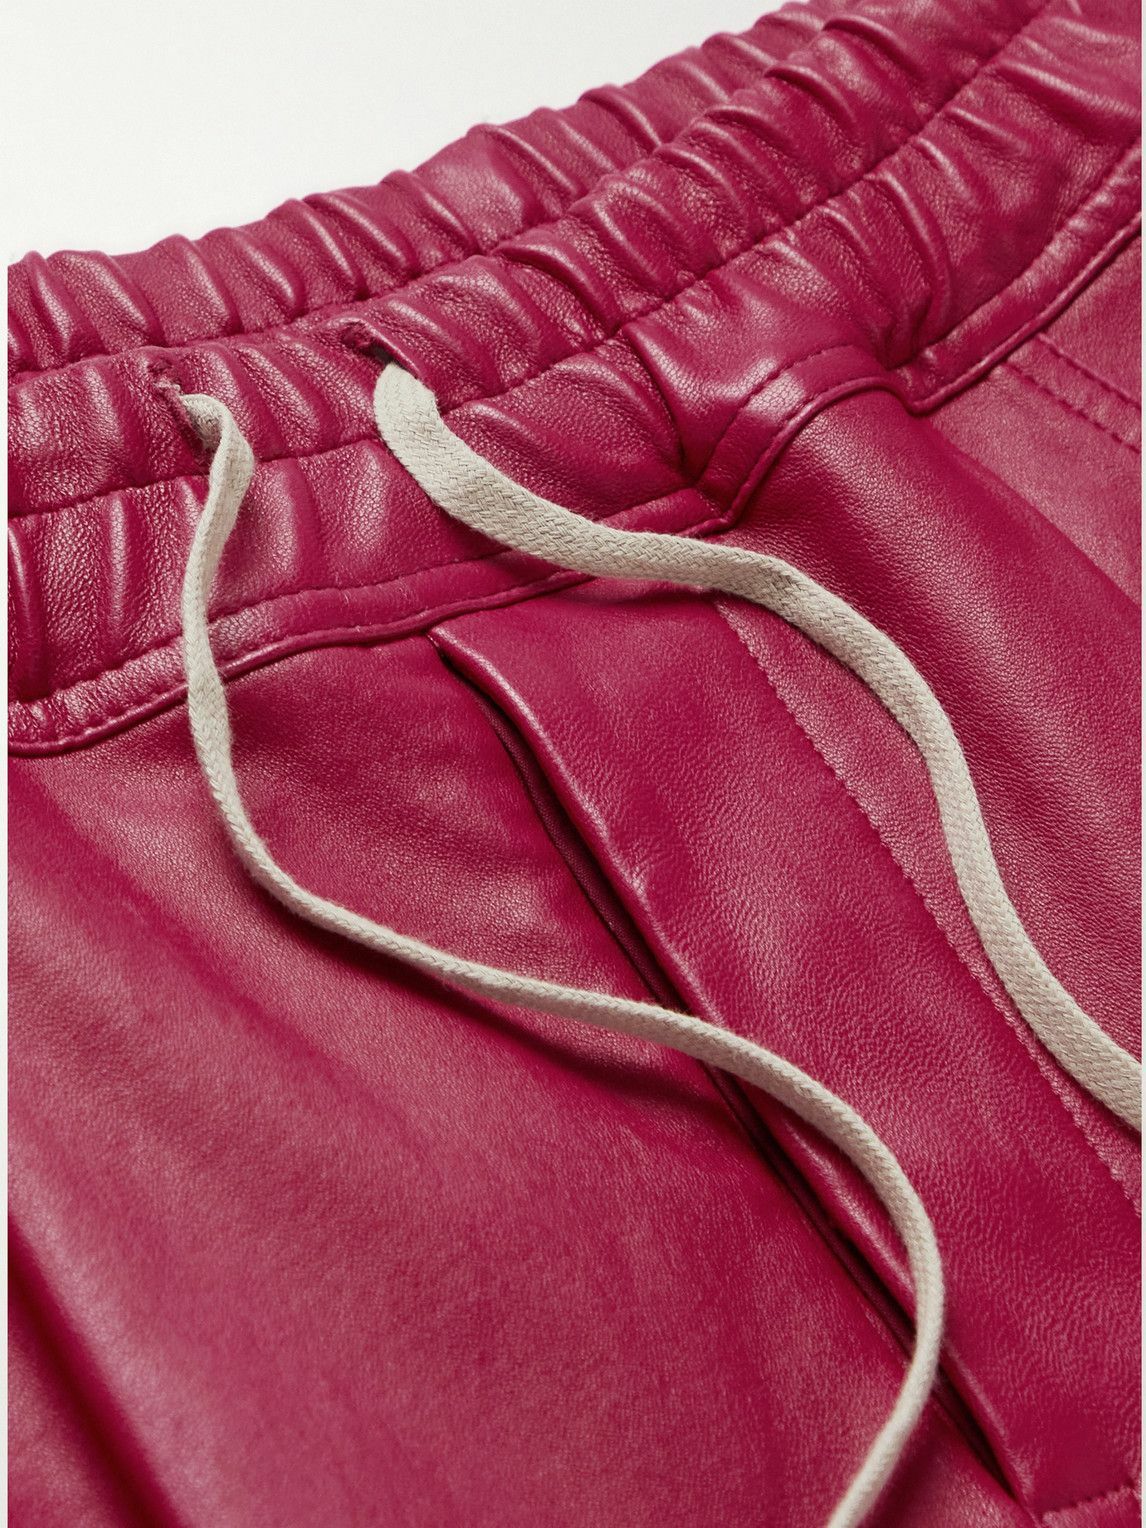 Rick Owens - Tapered Leather and Cotton-Blend Cargo Trousers - Pink